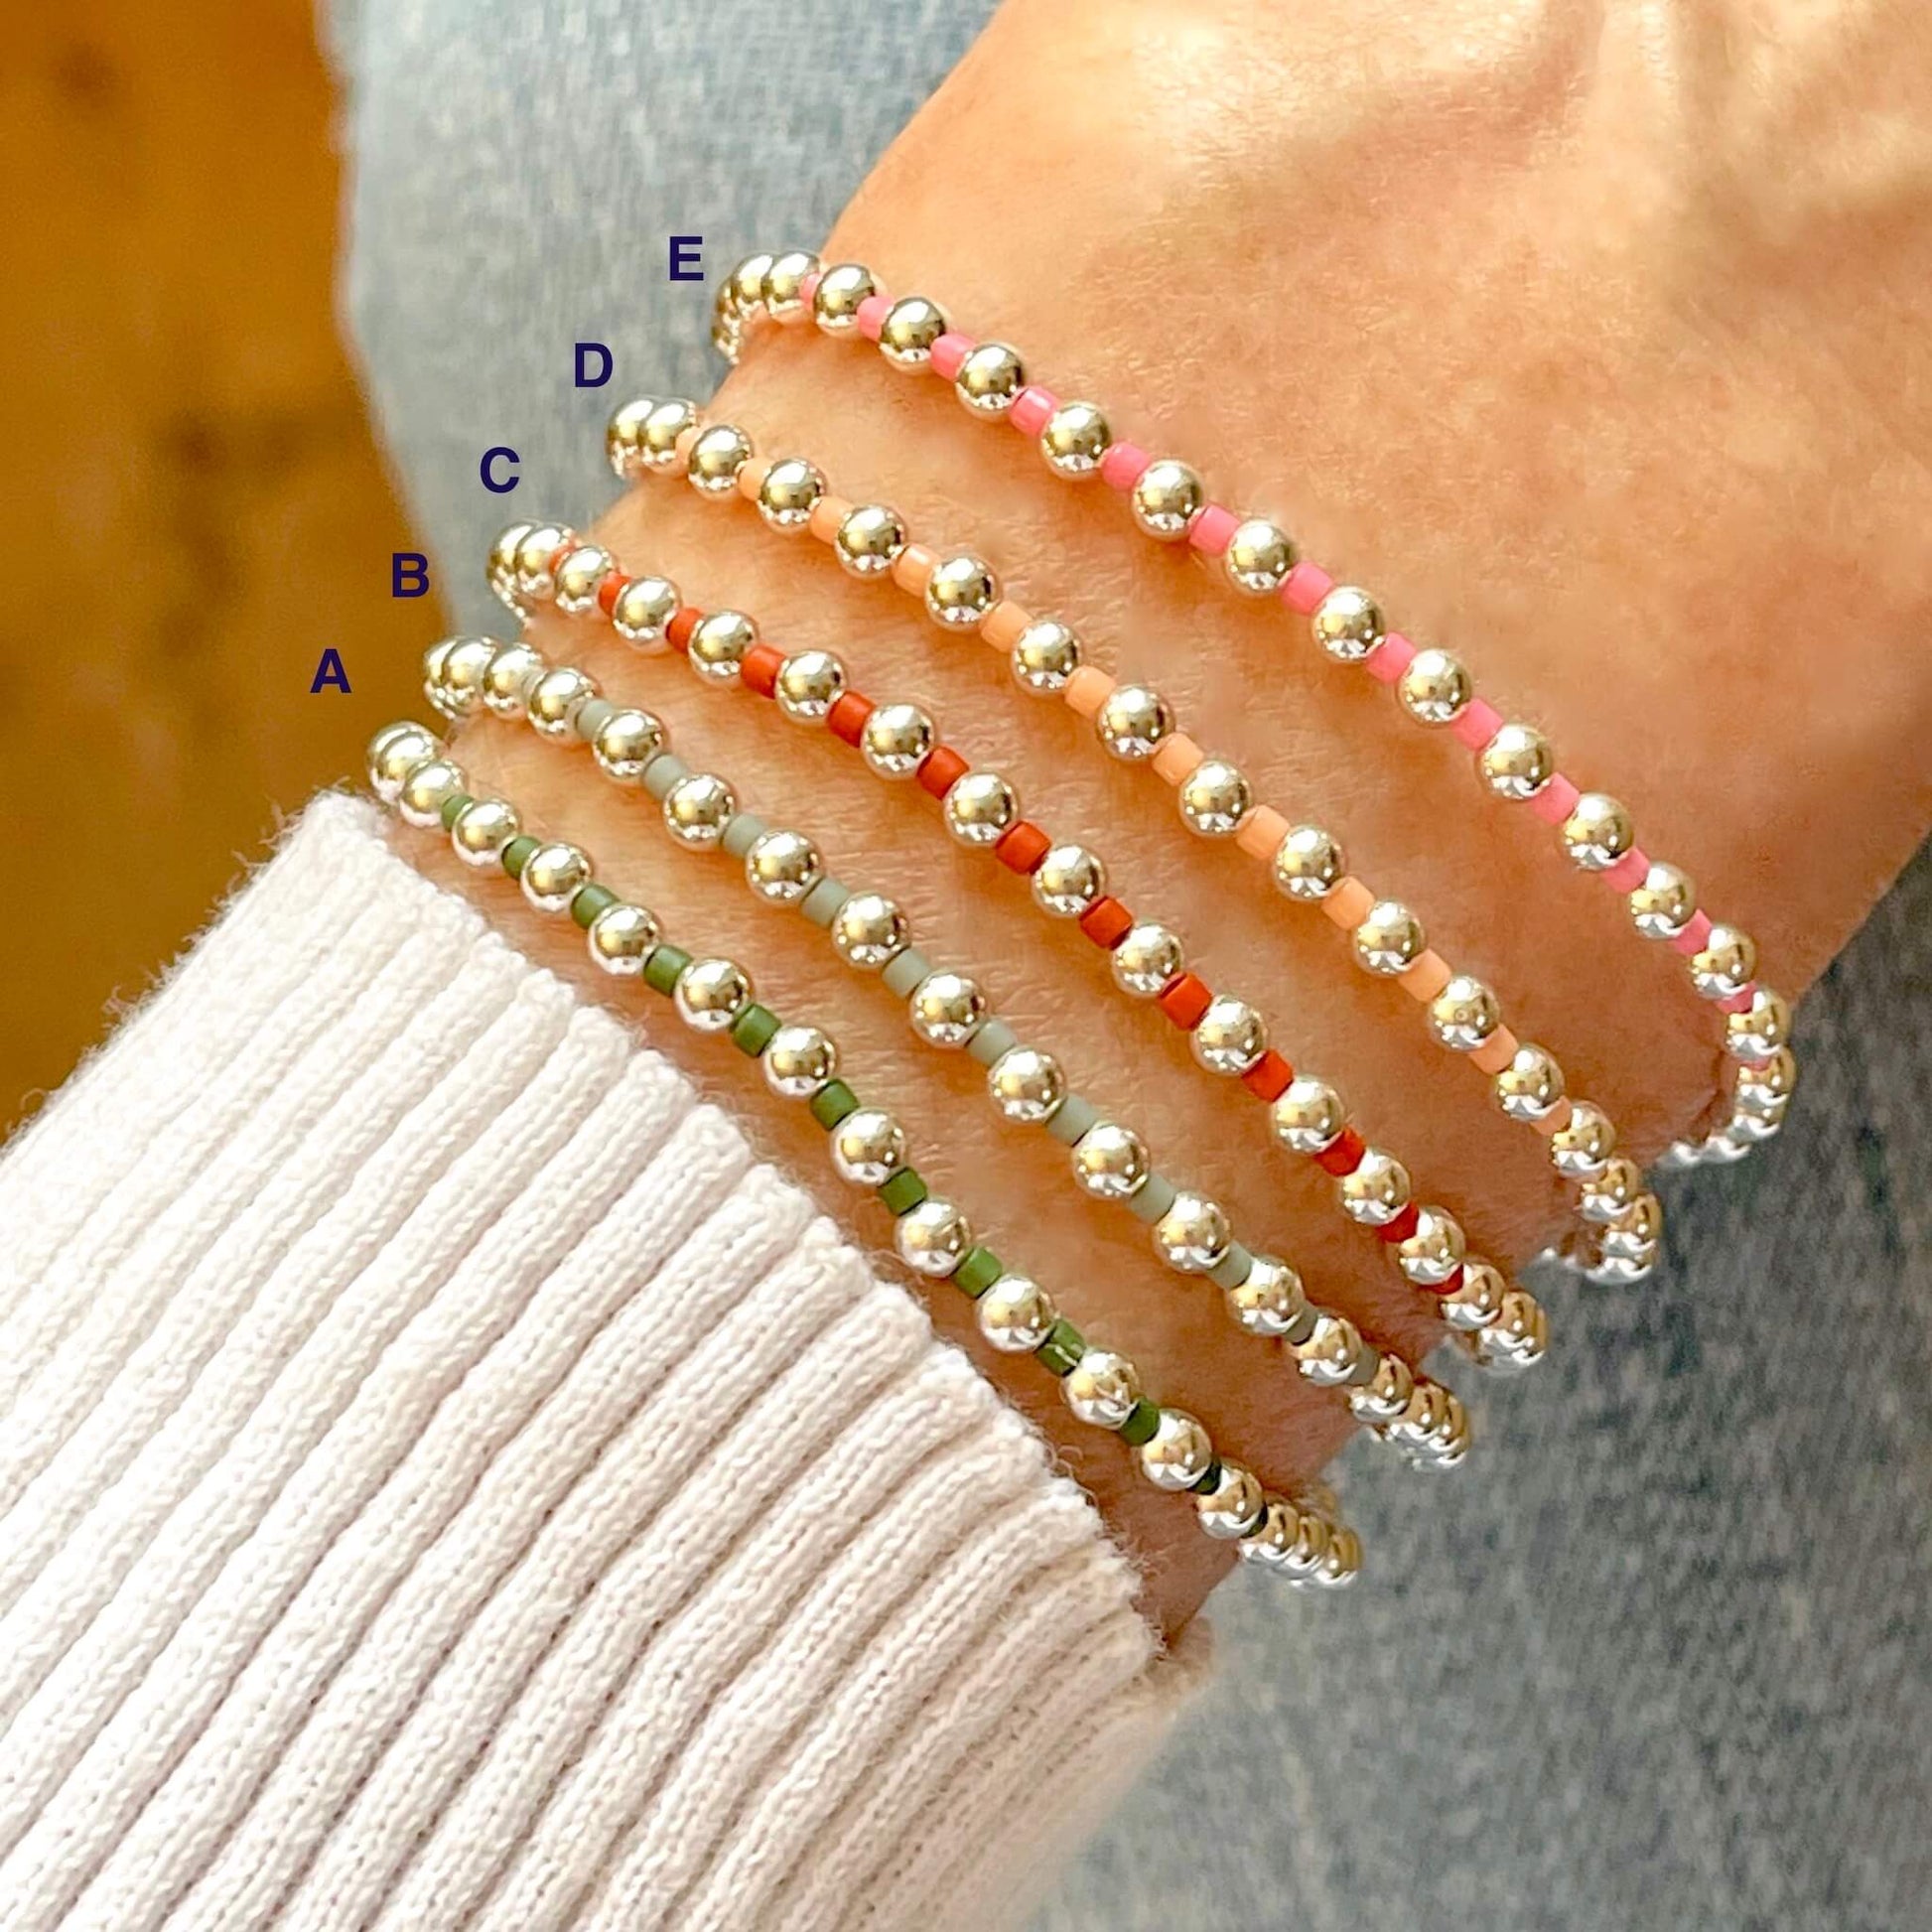 Women's bead bracelets with silver ball beads and alternating seed beads in green, gray, orange, peach, or pink on stretch cord.